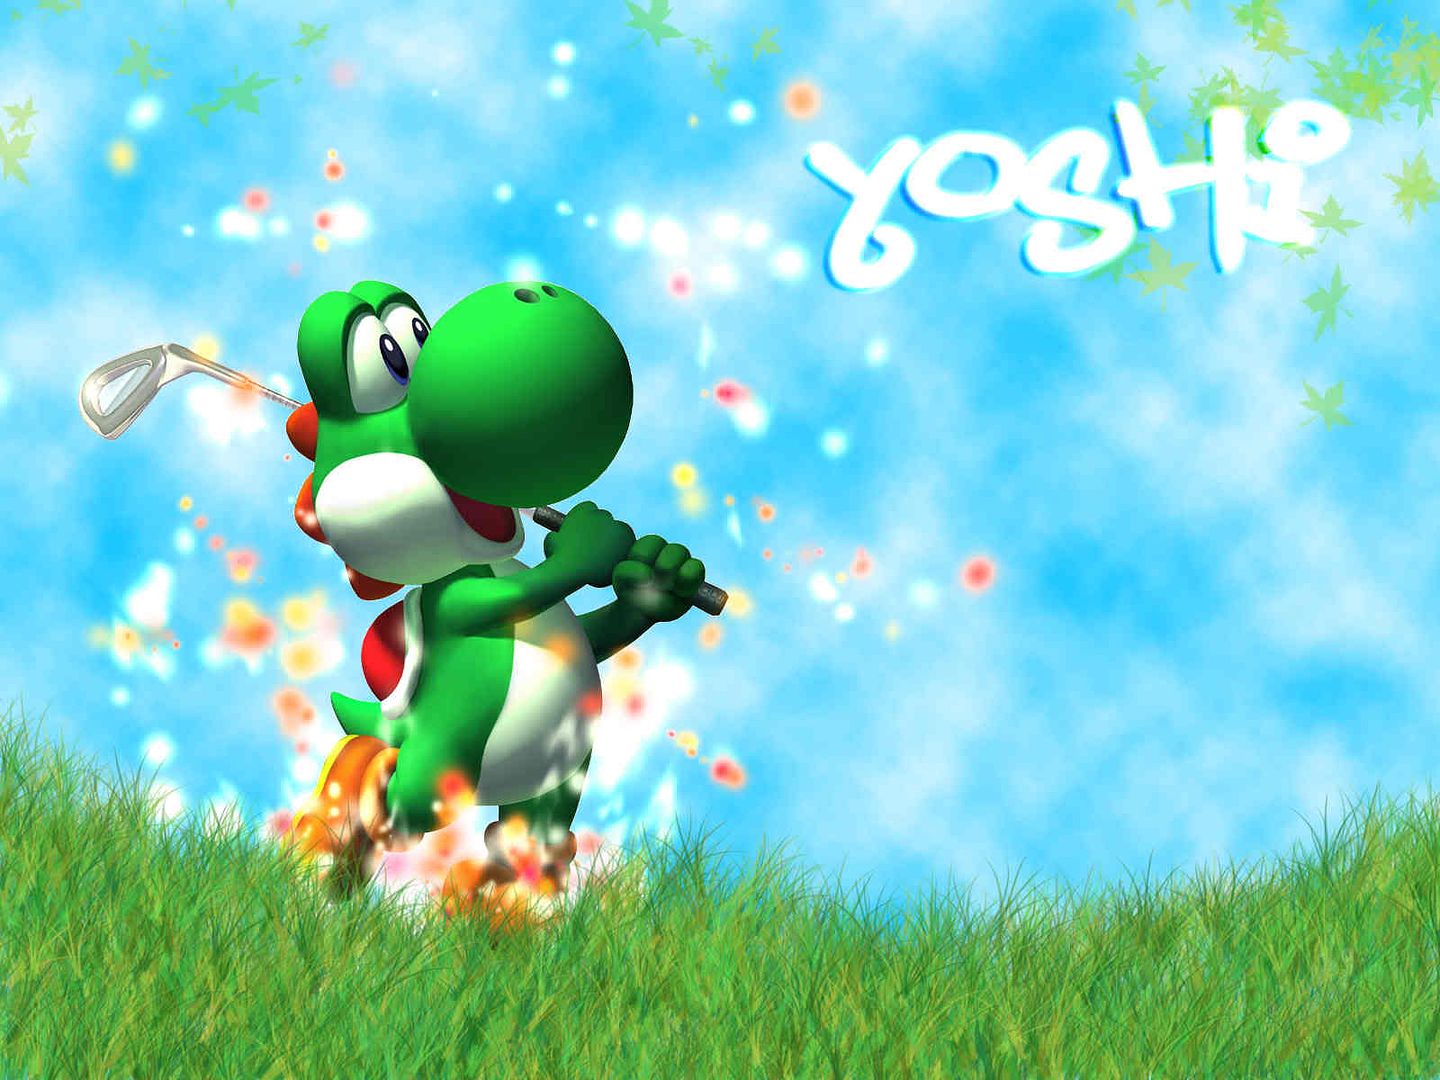 Yoshi! Pictures, Images and Photos